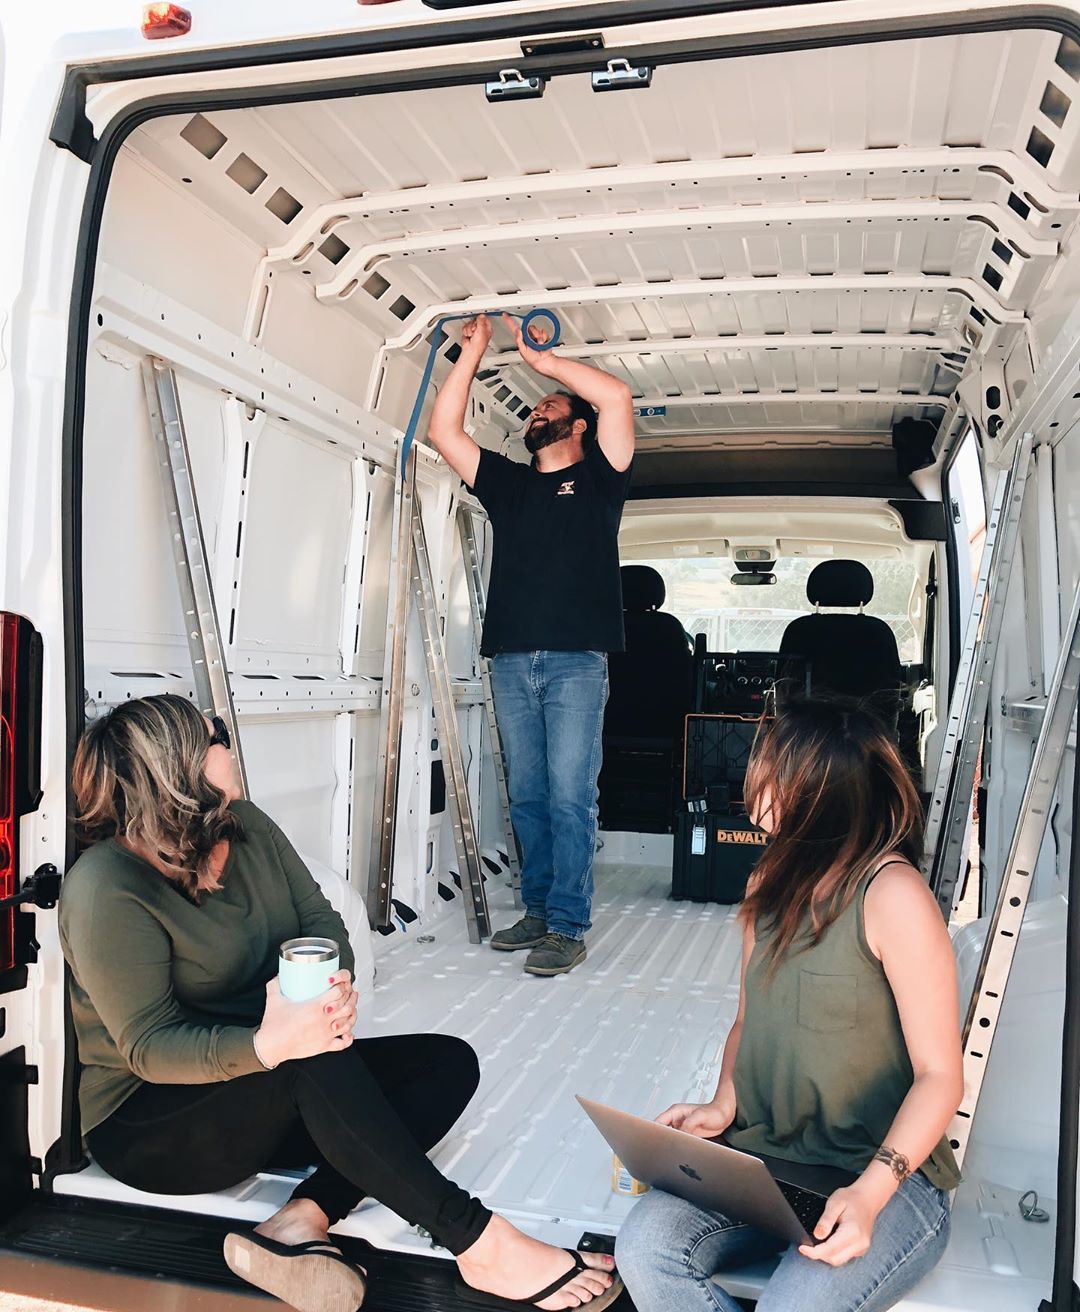 Man and two women fixing the inside of a van. Photo by Instagram user @losthiway_customs